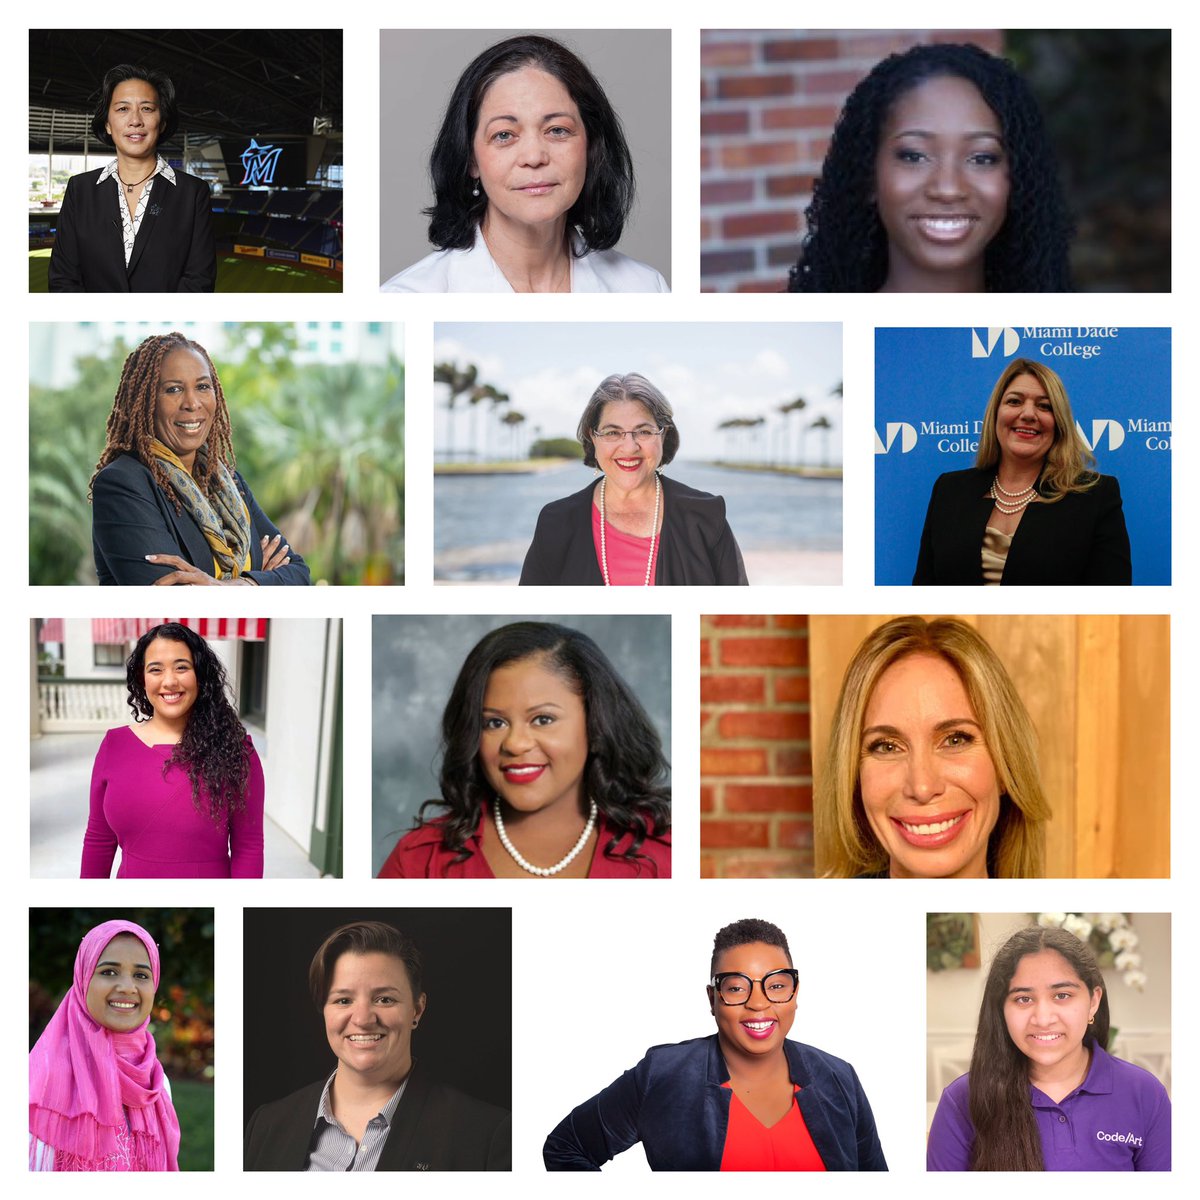 Forget #FloridaMan 👴🏻🐊 ....Meet #MiamiWoman.

‘#Miami Woman’ has tackled the #Covid19 crisis, pursued science to address #climate change, advocated forracial justice, built businesses, broken glass ceilings & changed the game by leading. 

2021 & beyond belongs to her. (1/x)